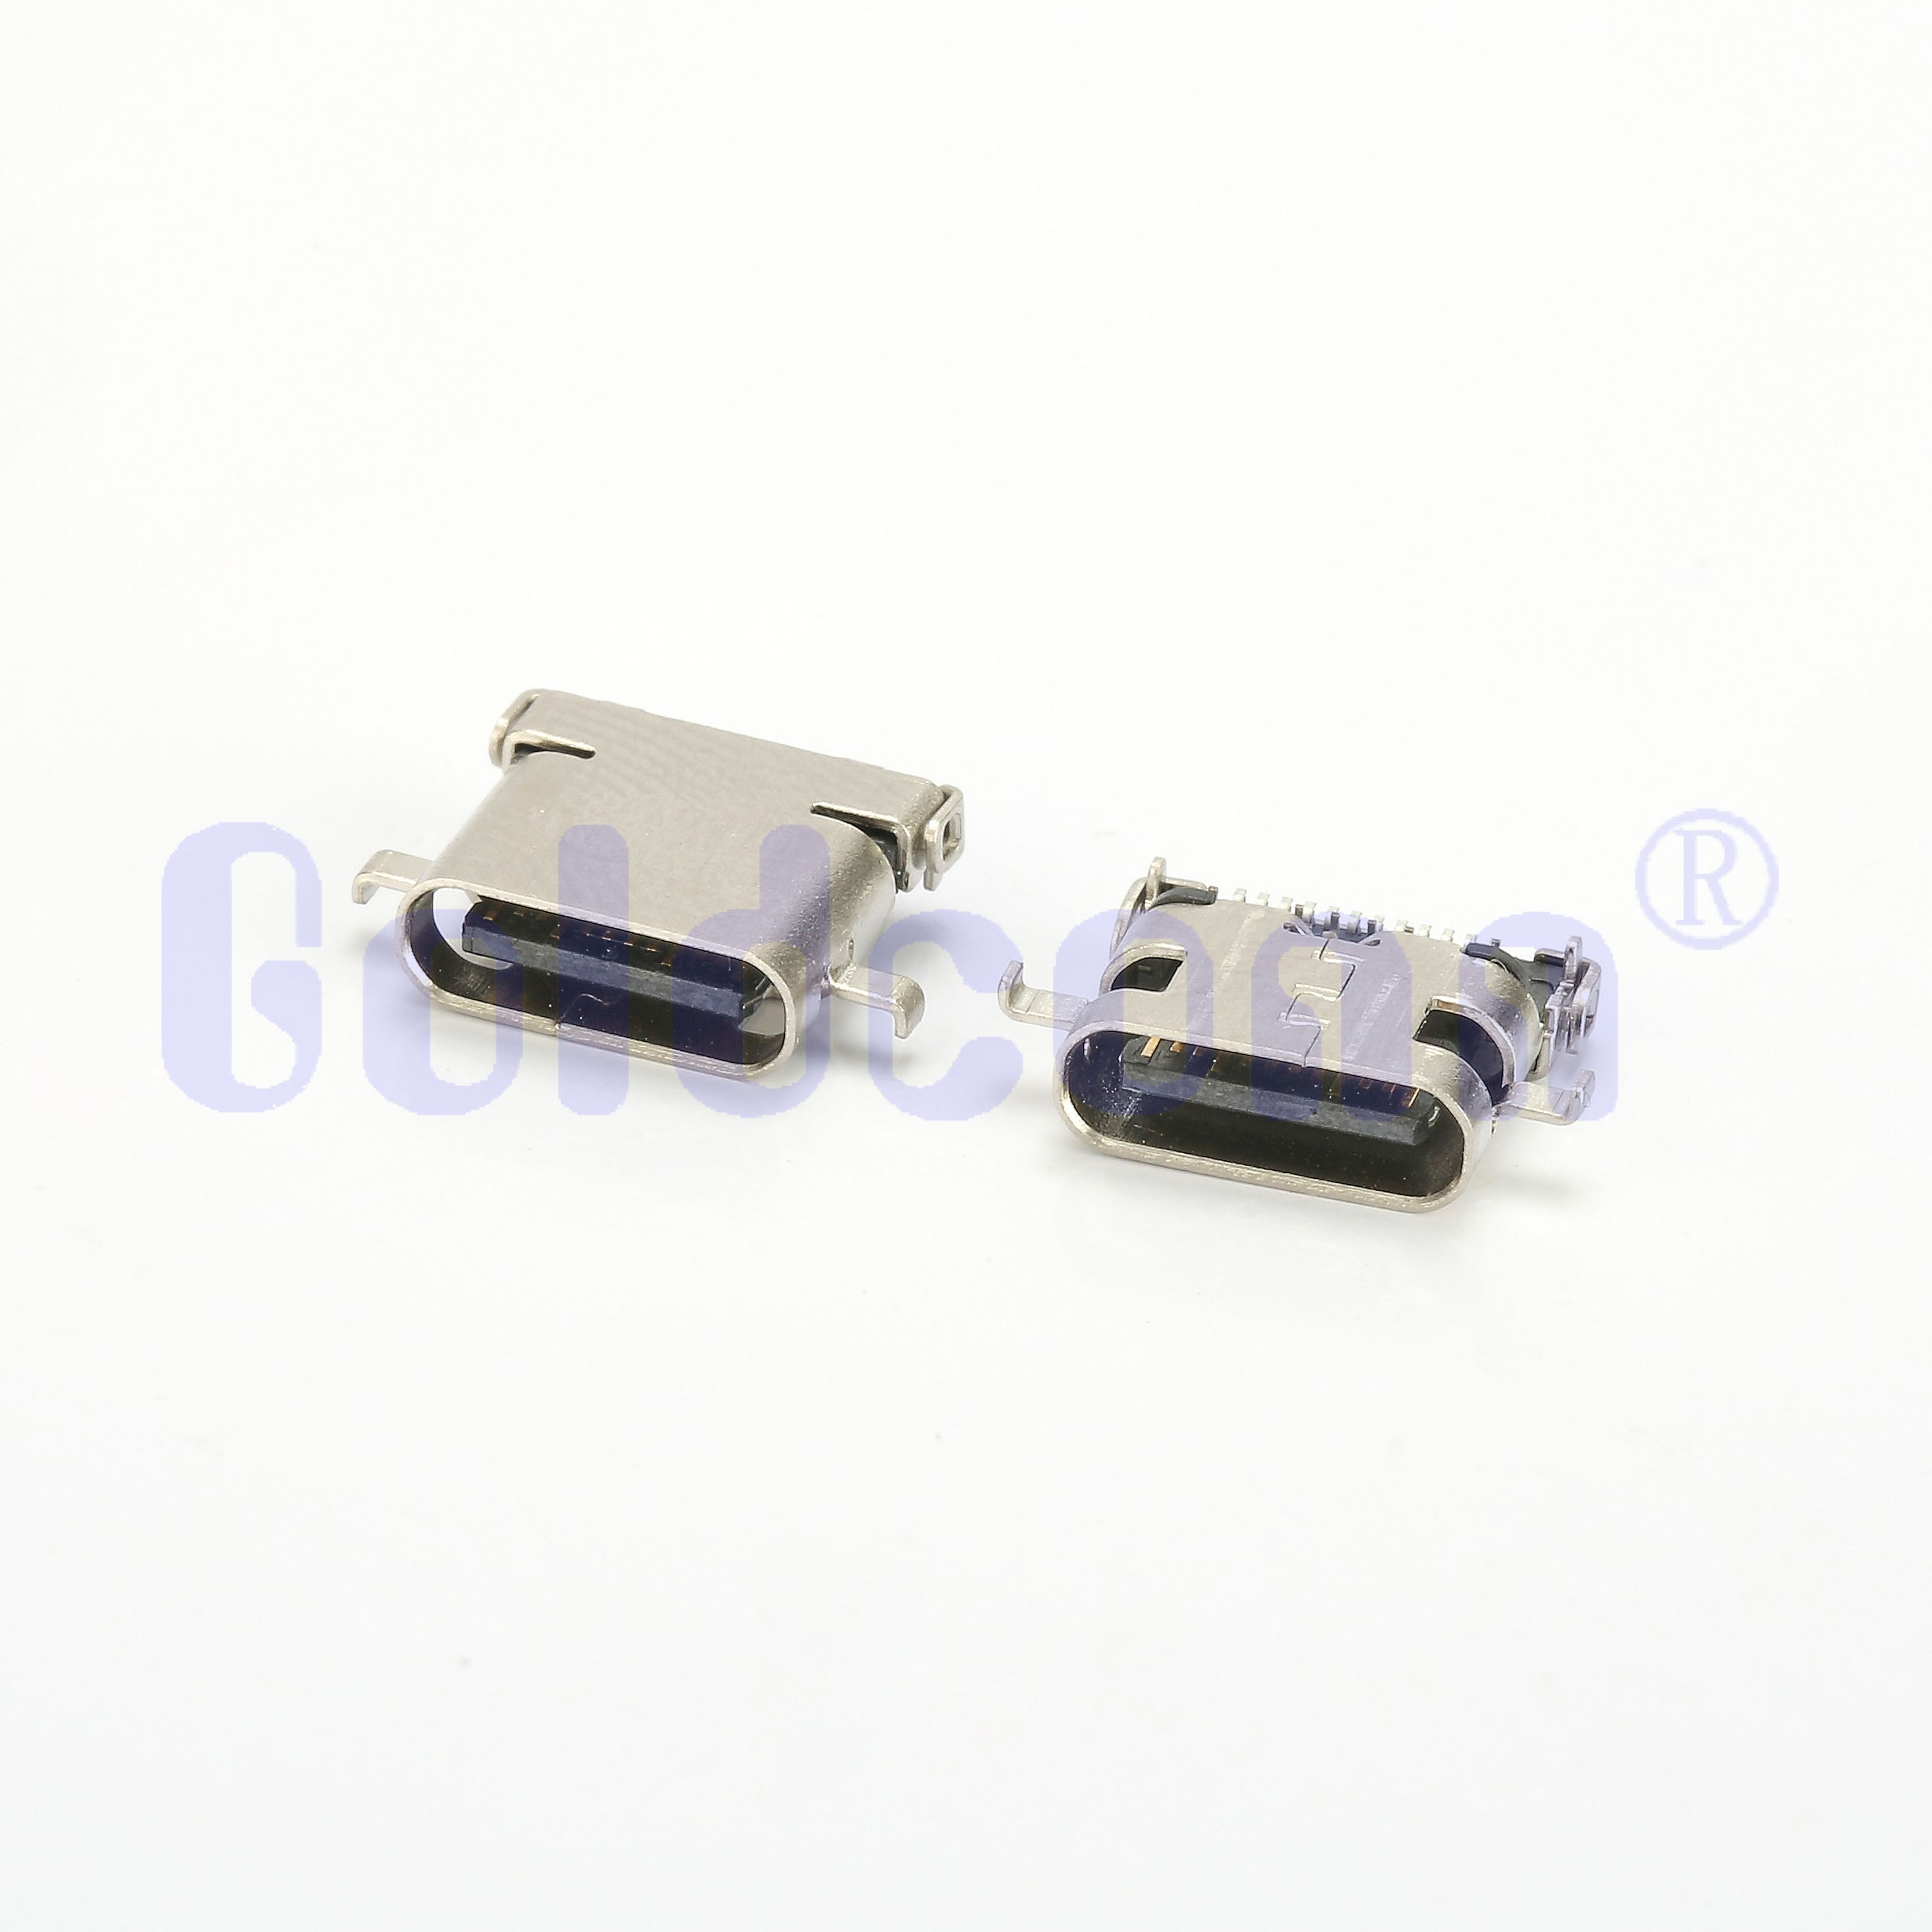 CF017-24LB02R-C3 Type C TID USB 24 Pin Female Connector Sinking Double Shell